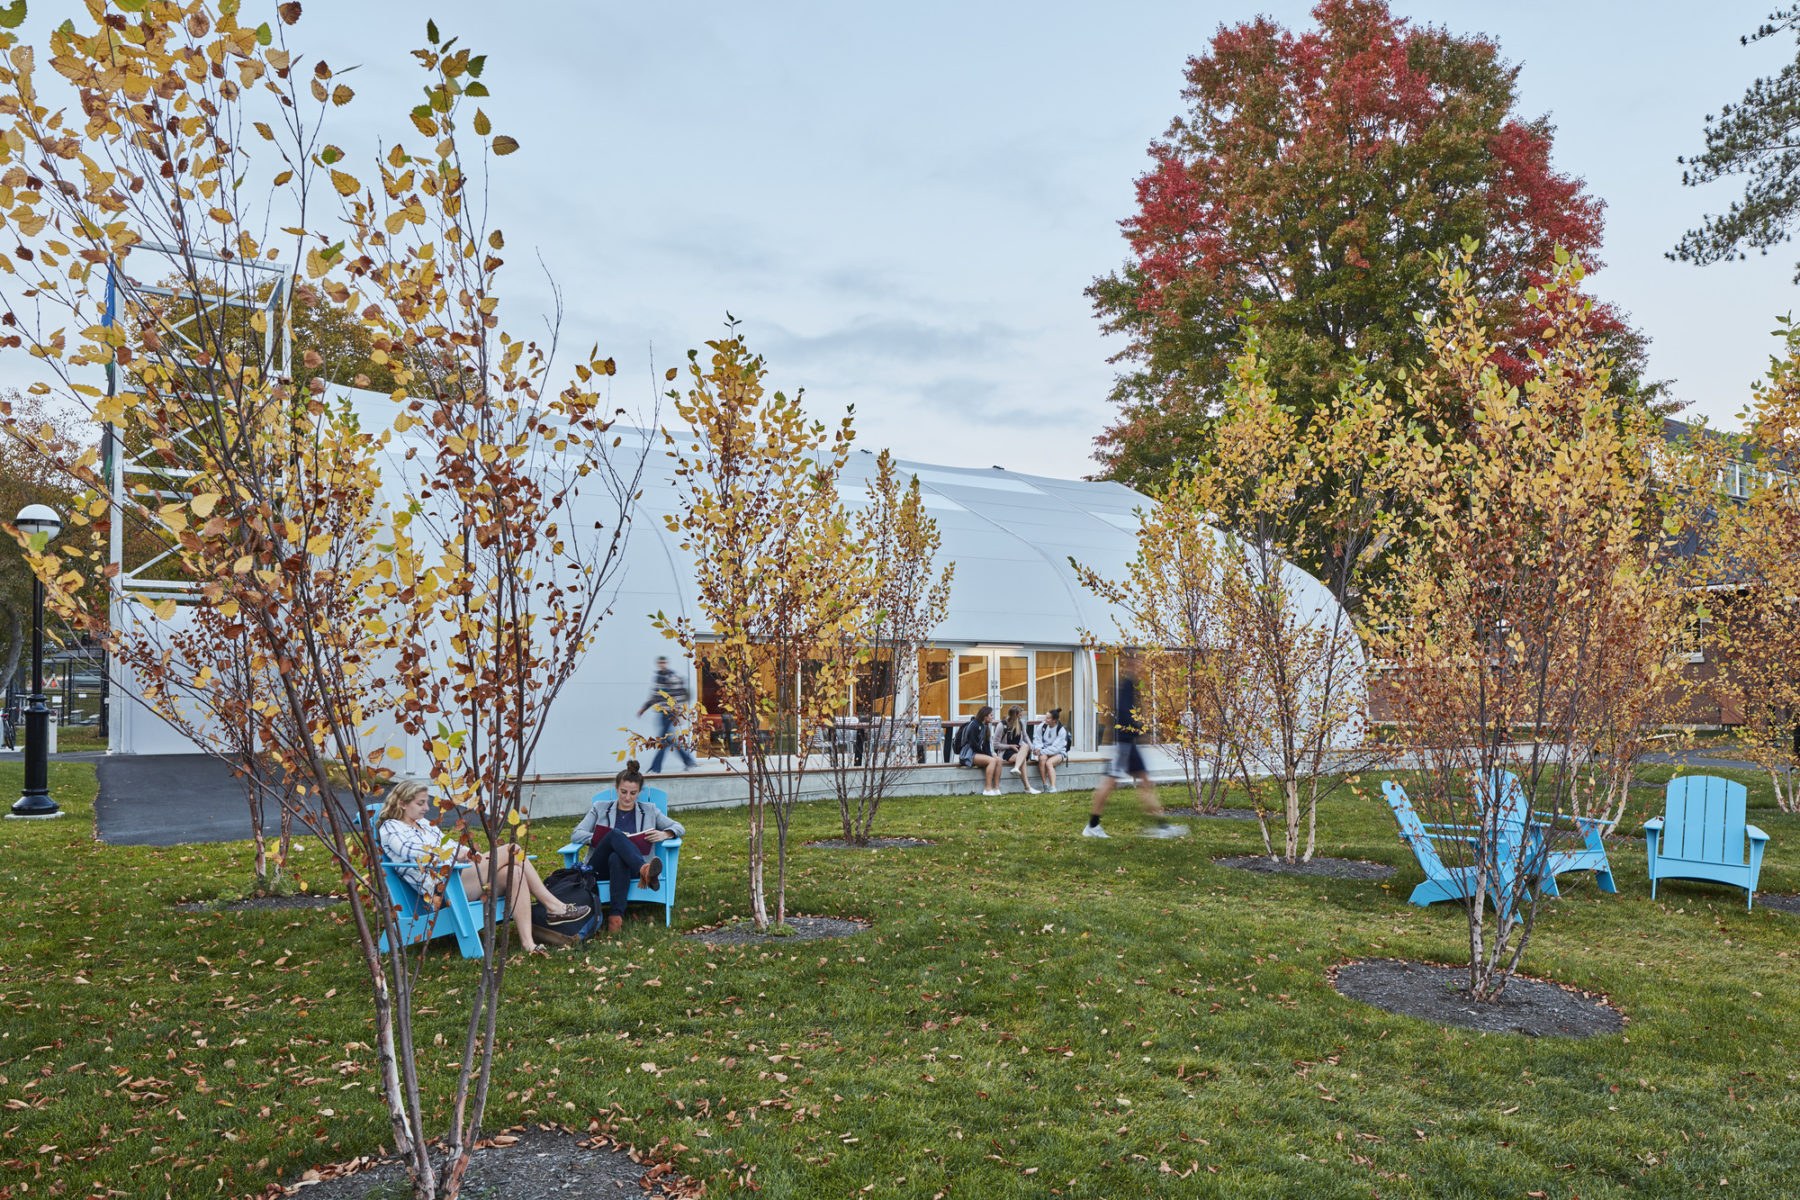 Students sitting outside a building in the fall